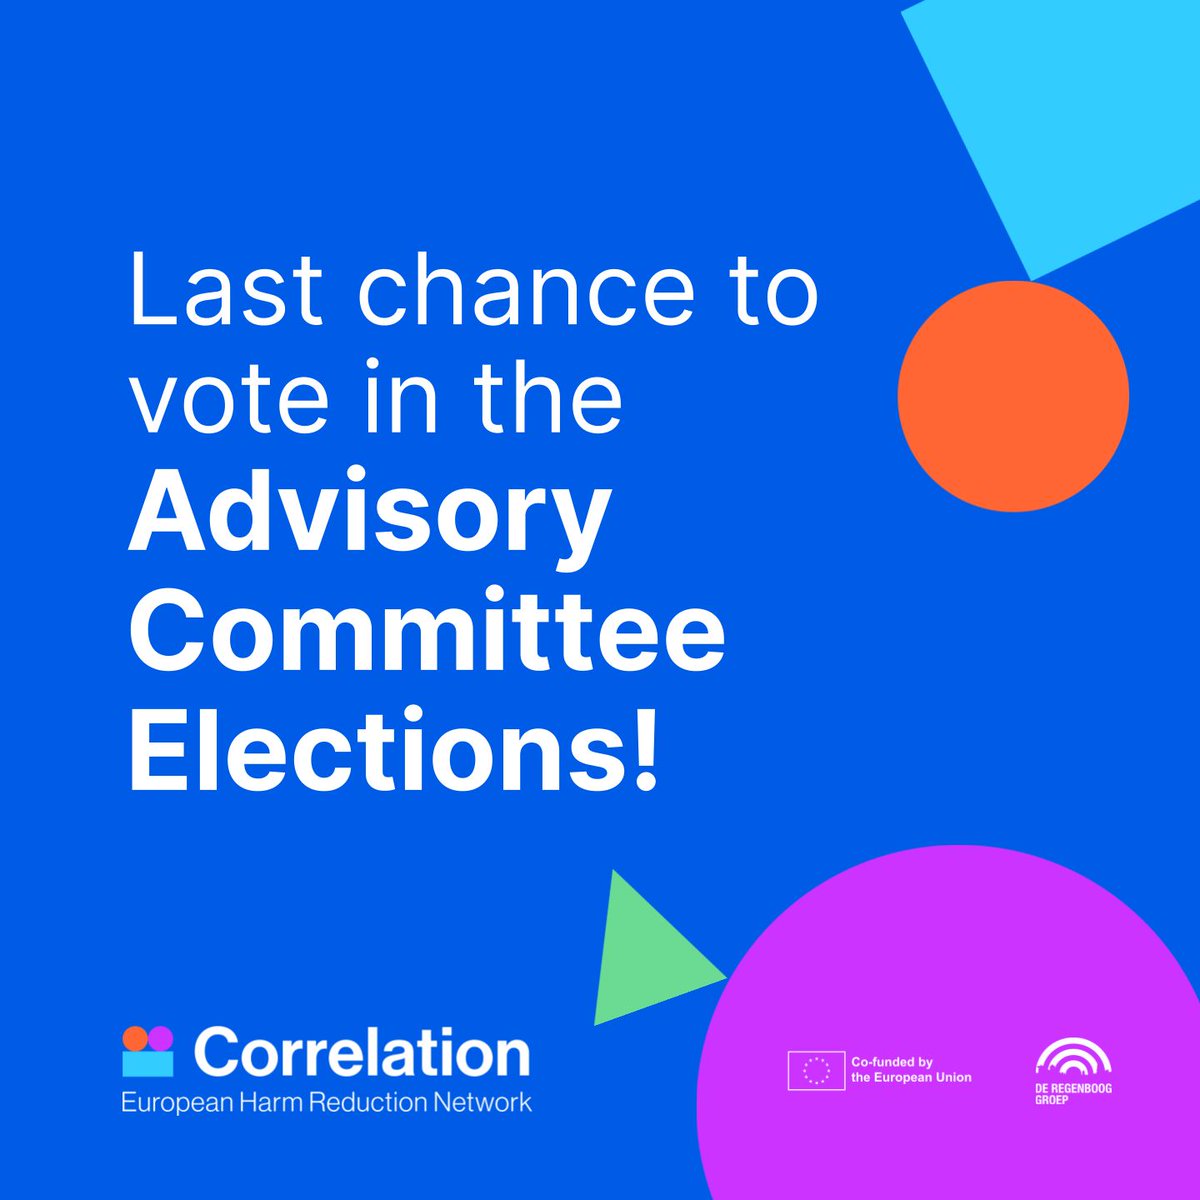 ⏰ C-EHRN Members, today marks the final chance to vote in the Advisory Committee Elections and we would love to get your support! Haven't voted yet? 🤔 Send an email to skolle@correlation-net.org to get your link to vote.